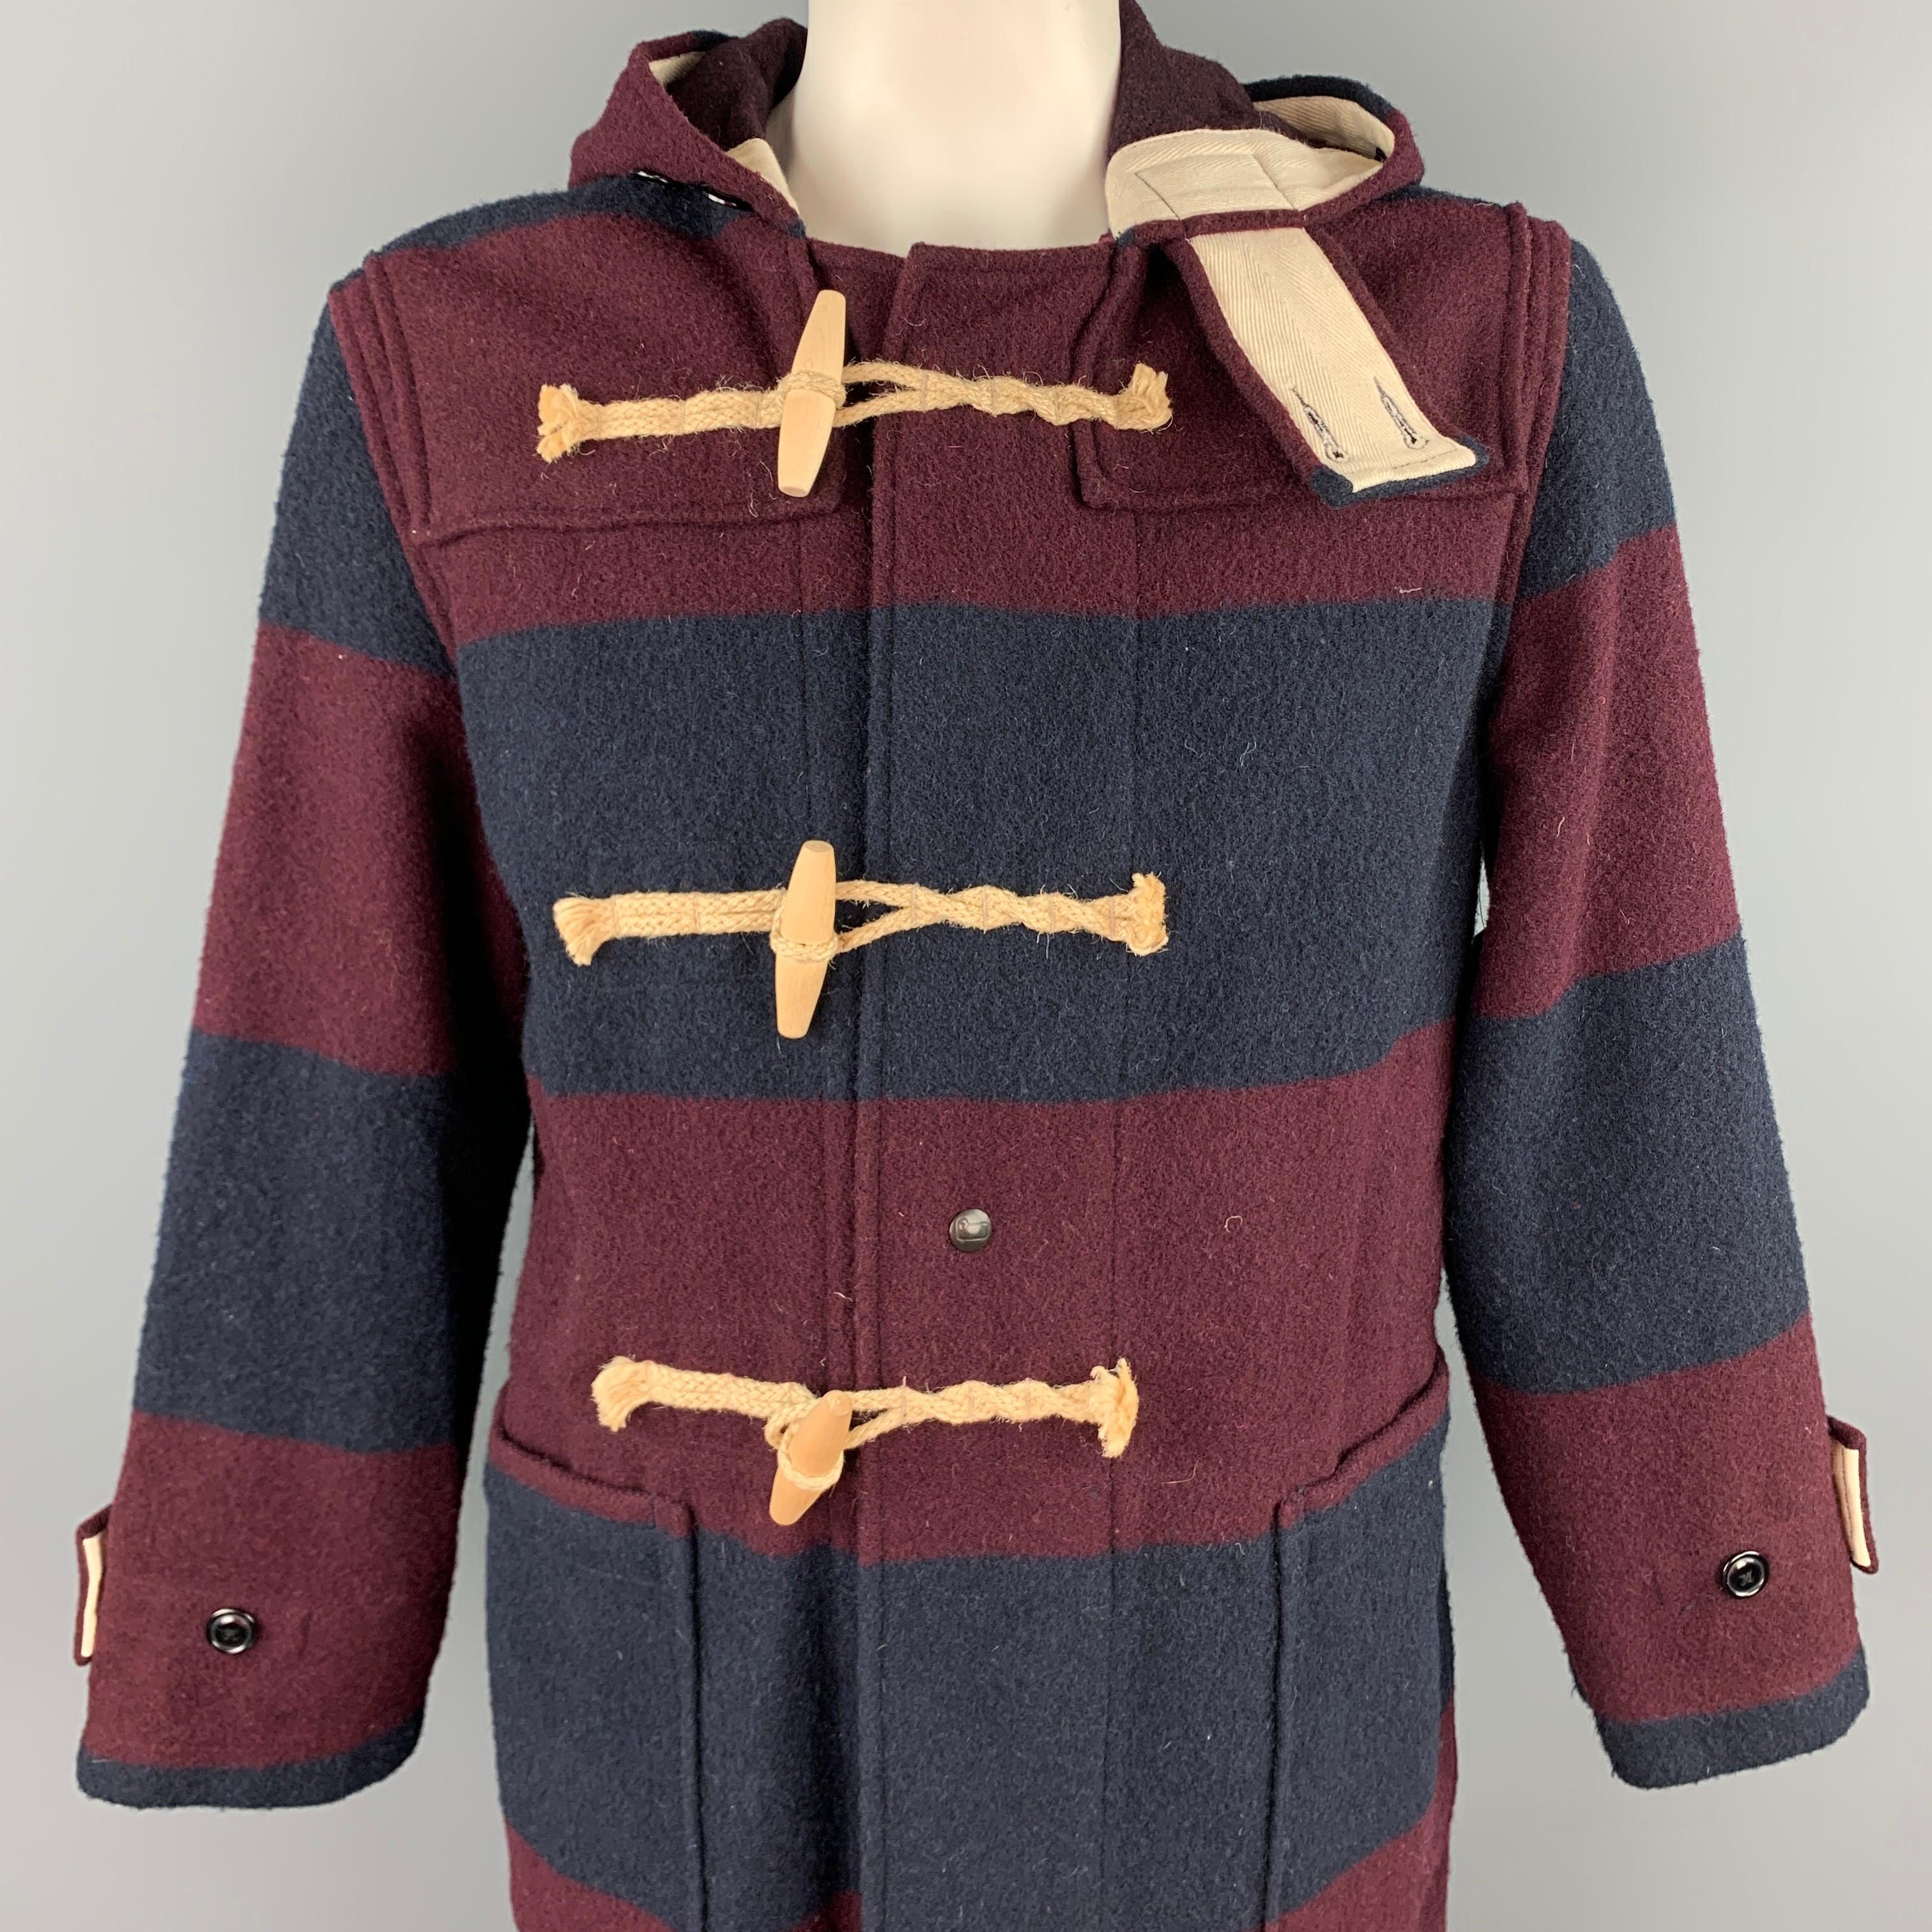 WOOLRICH coat comes i a burgundy & navy stripe wool / nylon featuring a hooded style, patch pockets, buttoned details, and a toggle closure. Made in USA.

Good Pre-Owned Condition.
Marked: M

Measurements:

Shoulder: 20 in.
Chest: 46 in.
Sleeve: